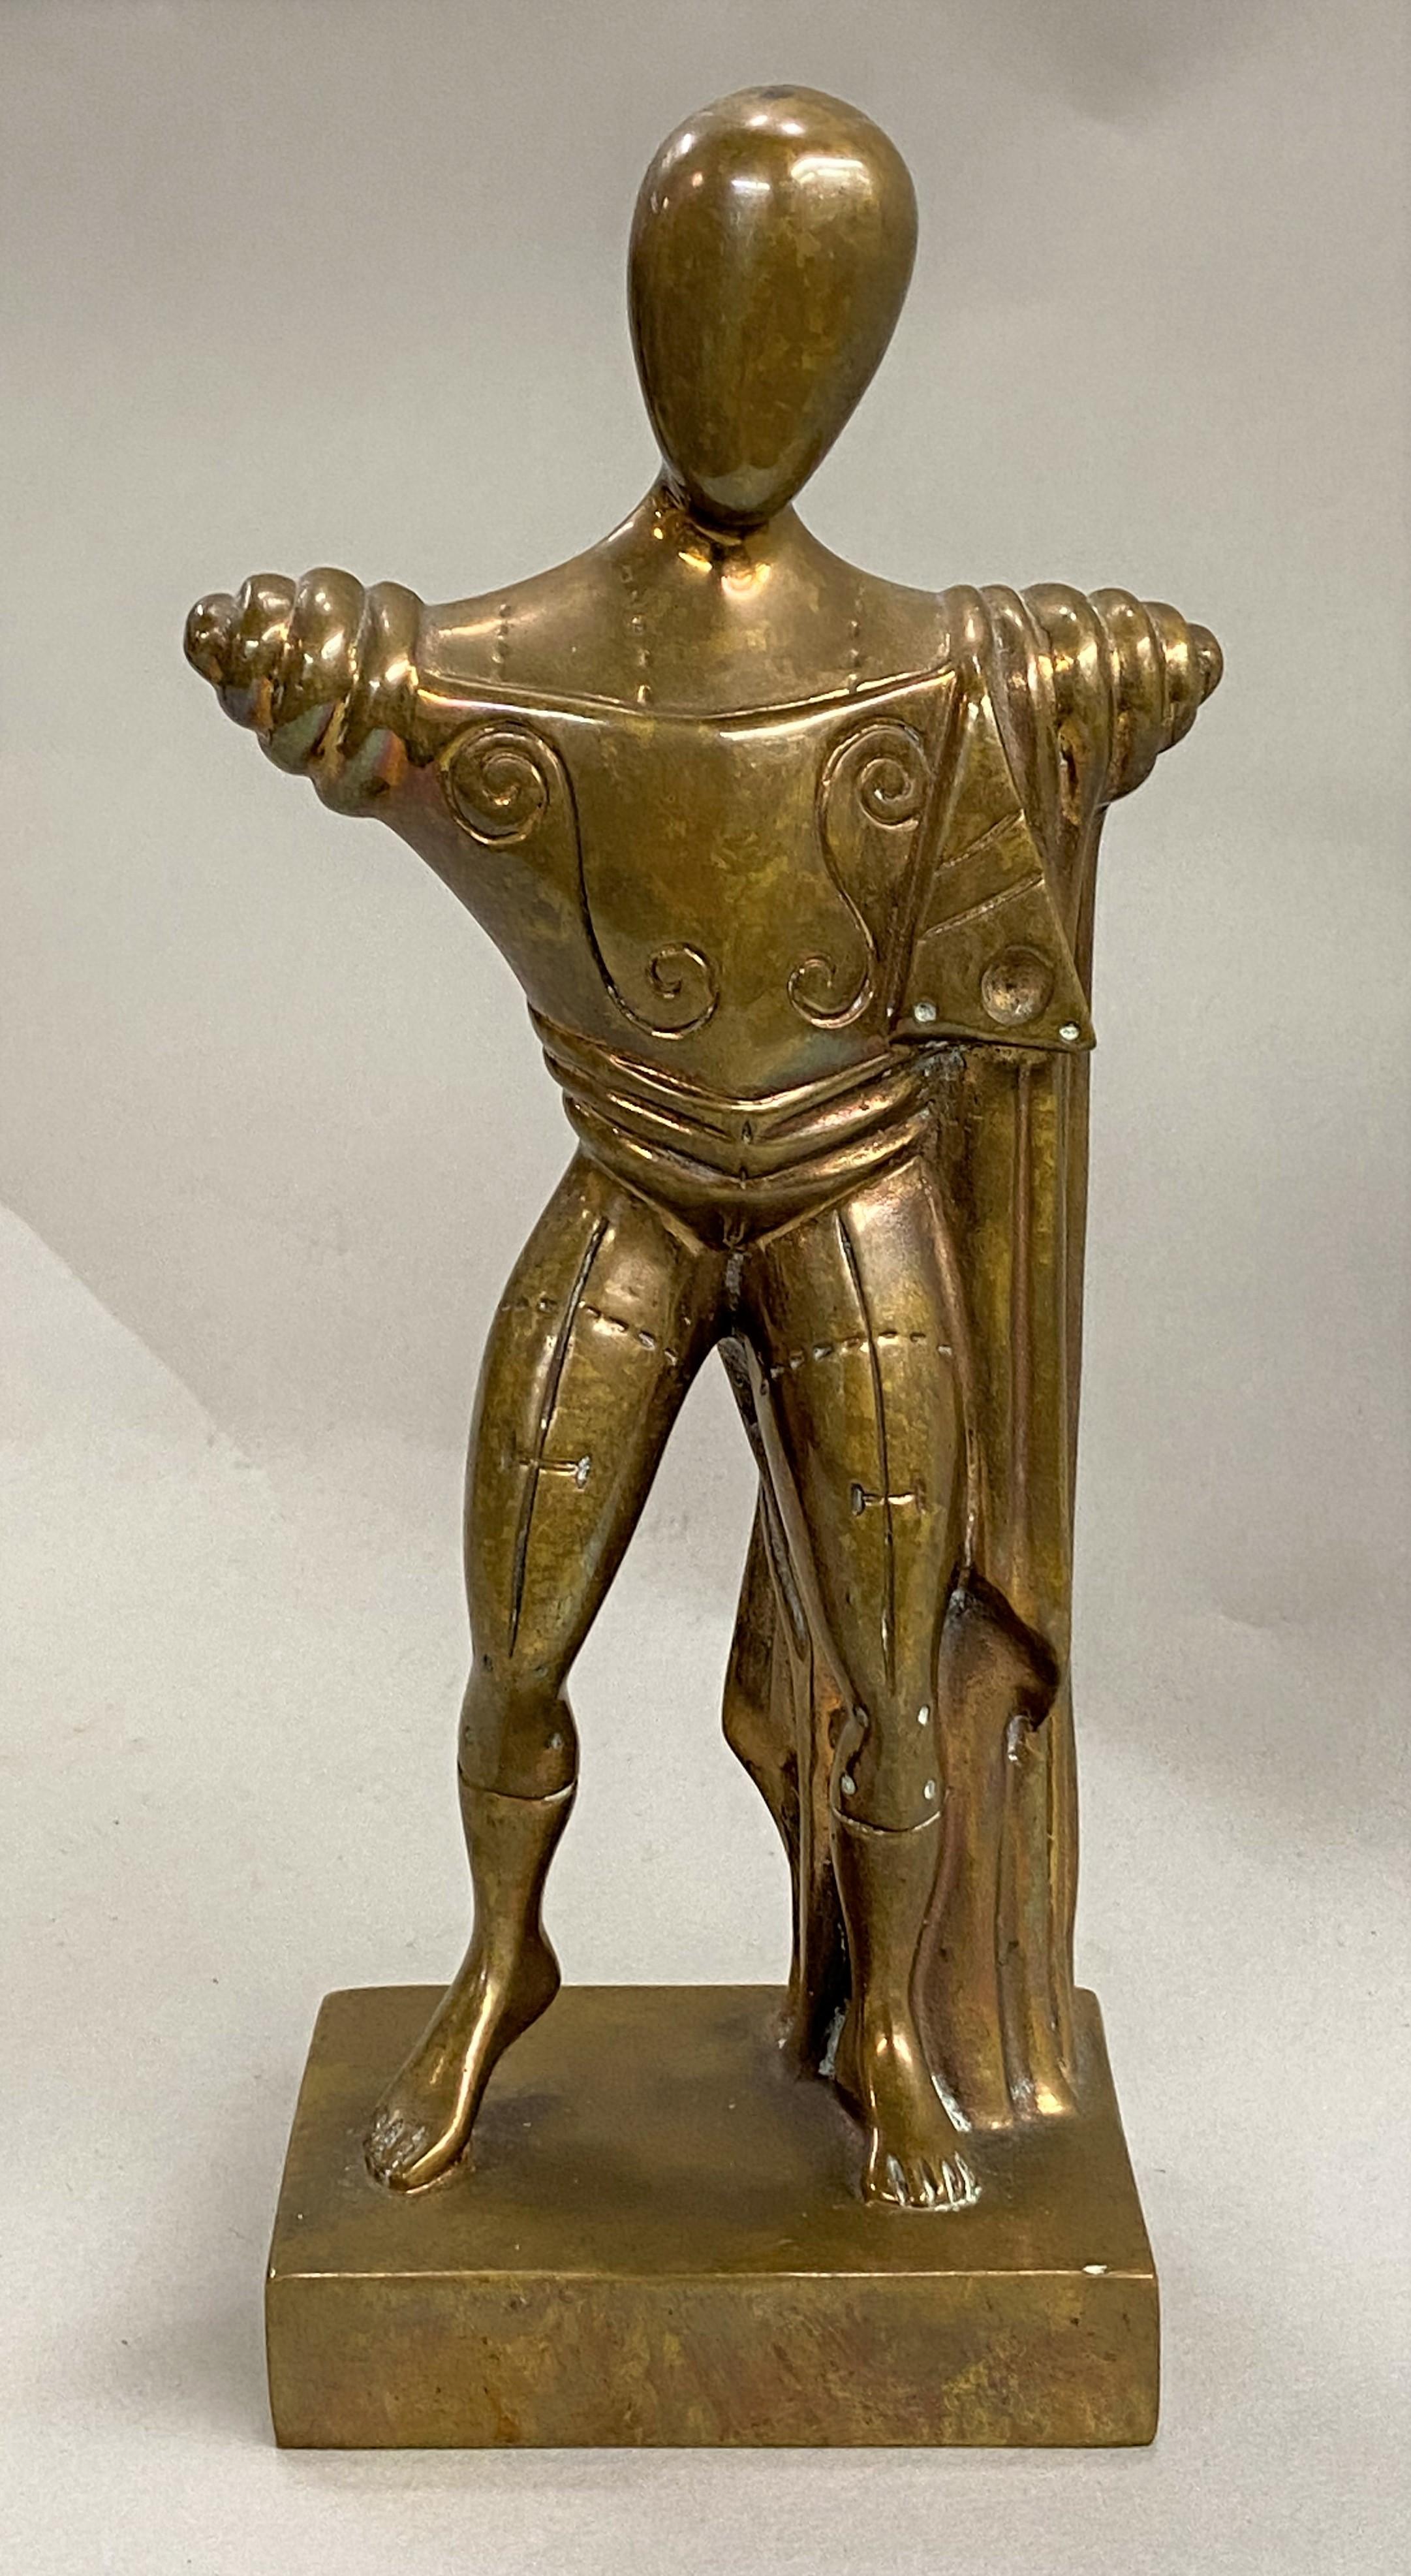 A fine polished bronze figural sculpture by Greek / Italian artist Giorgio De Chirico (1888-1978). De Chirico was born from Italian parents in Volos, Greece, and when his father died in 1905, his mother took him and his brother to Munich where he